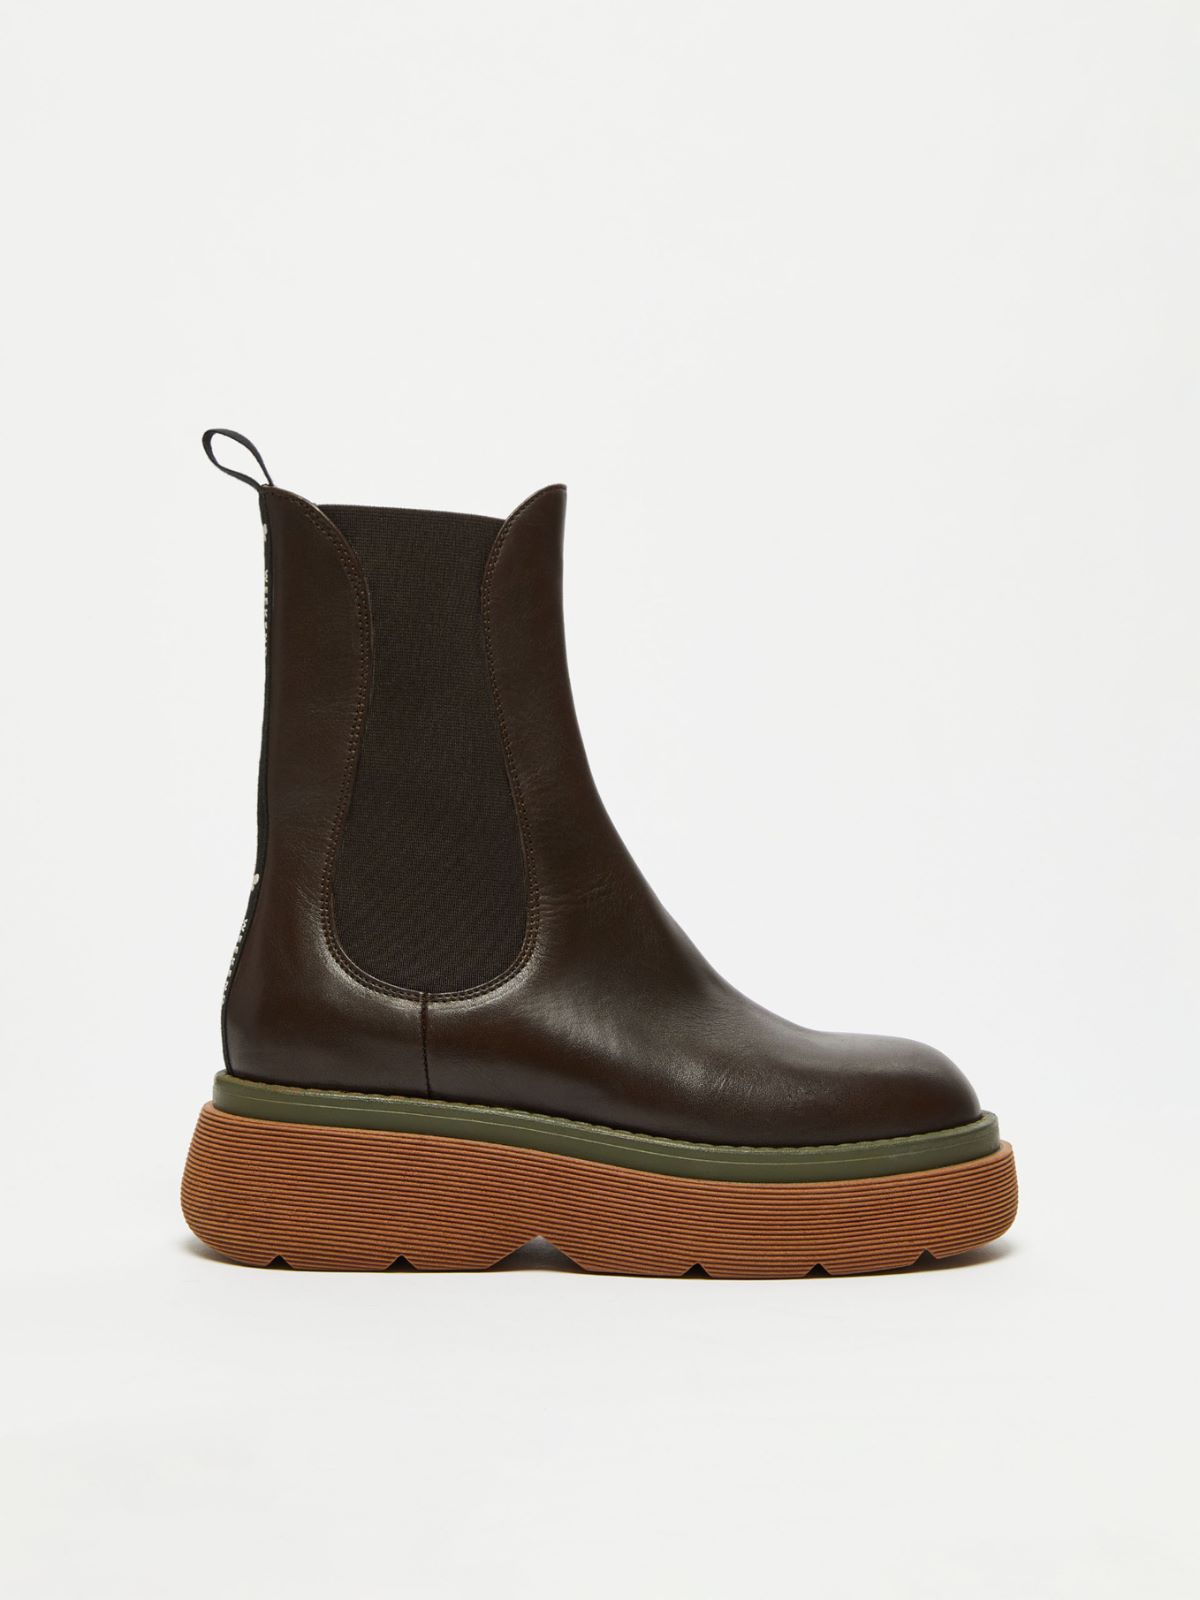 Leather ankle boots - DARK BOWN - Weekend Max Mara